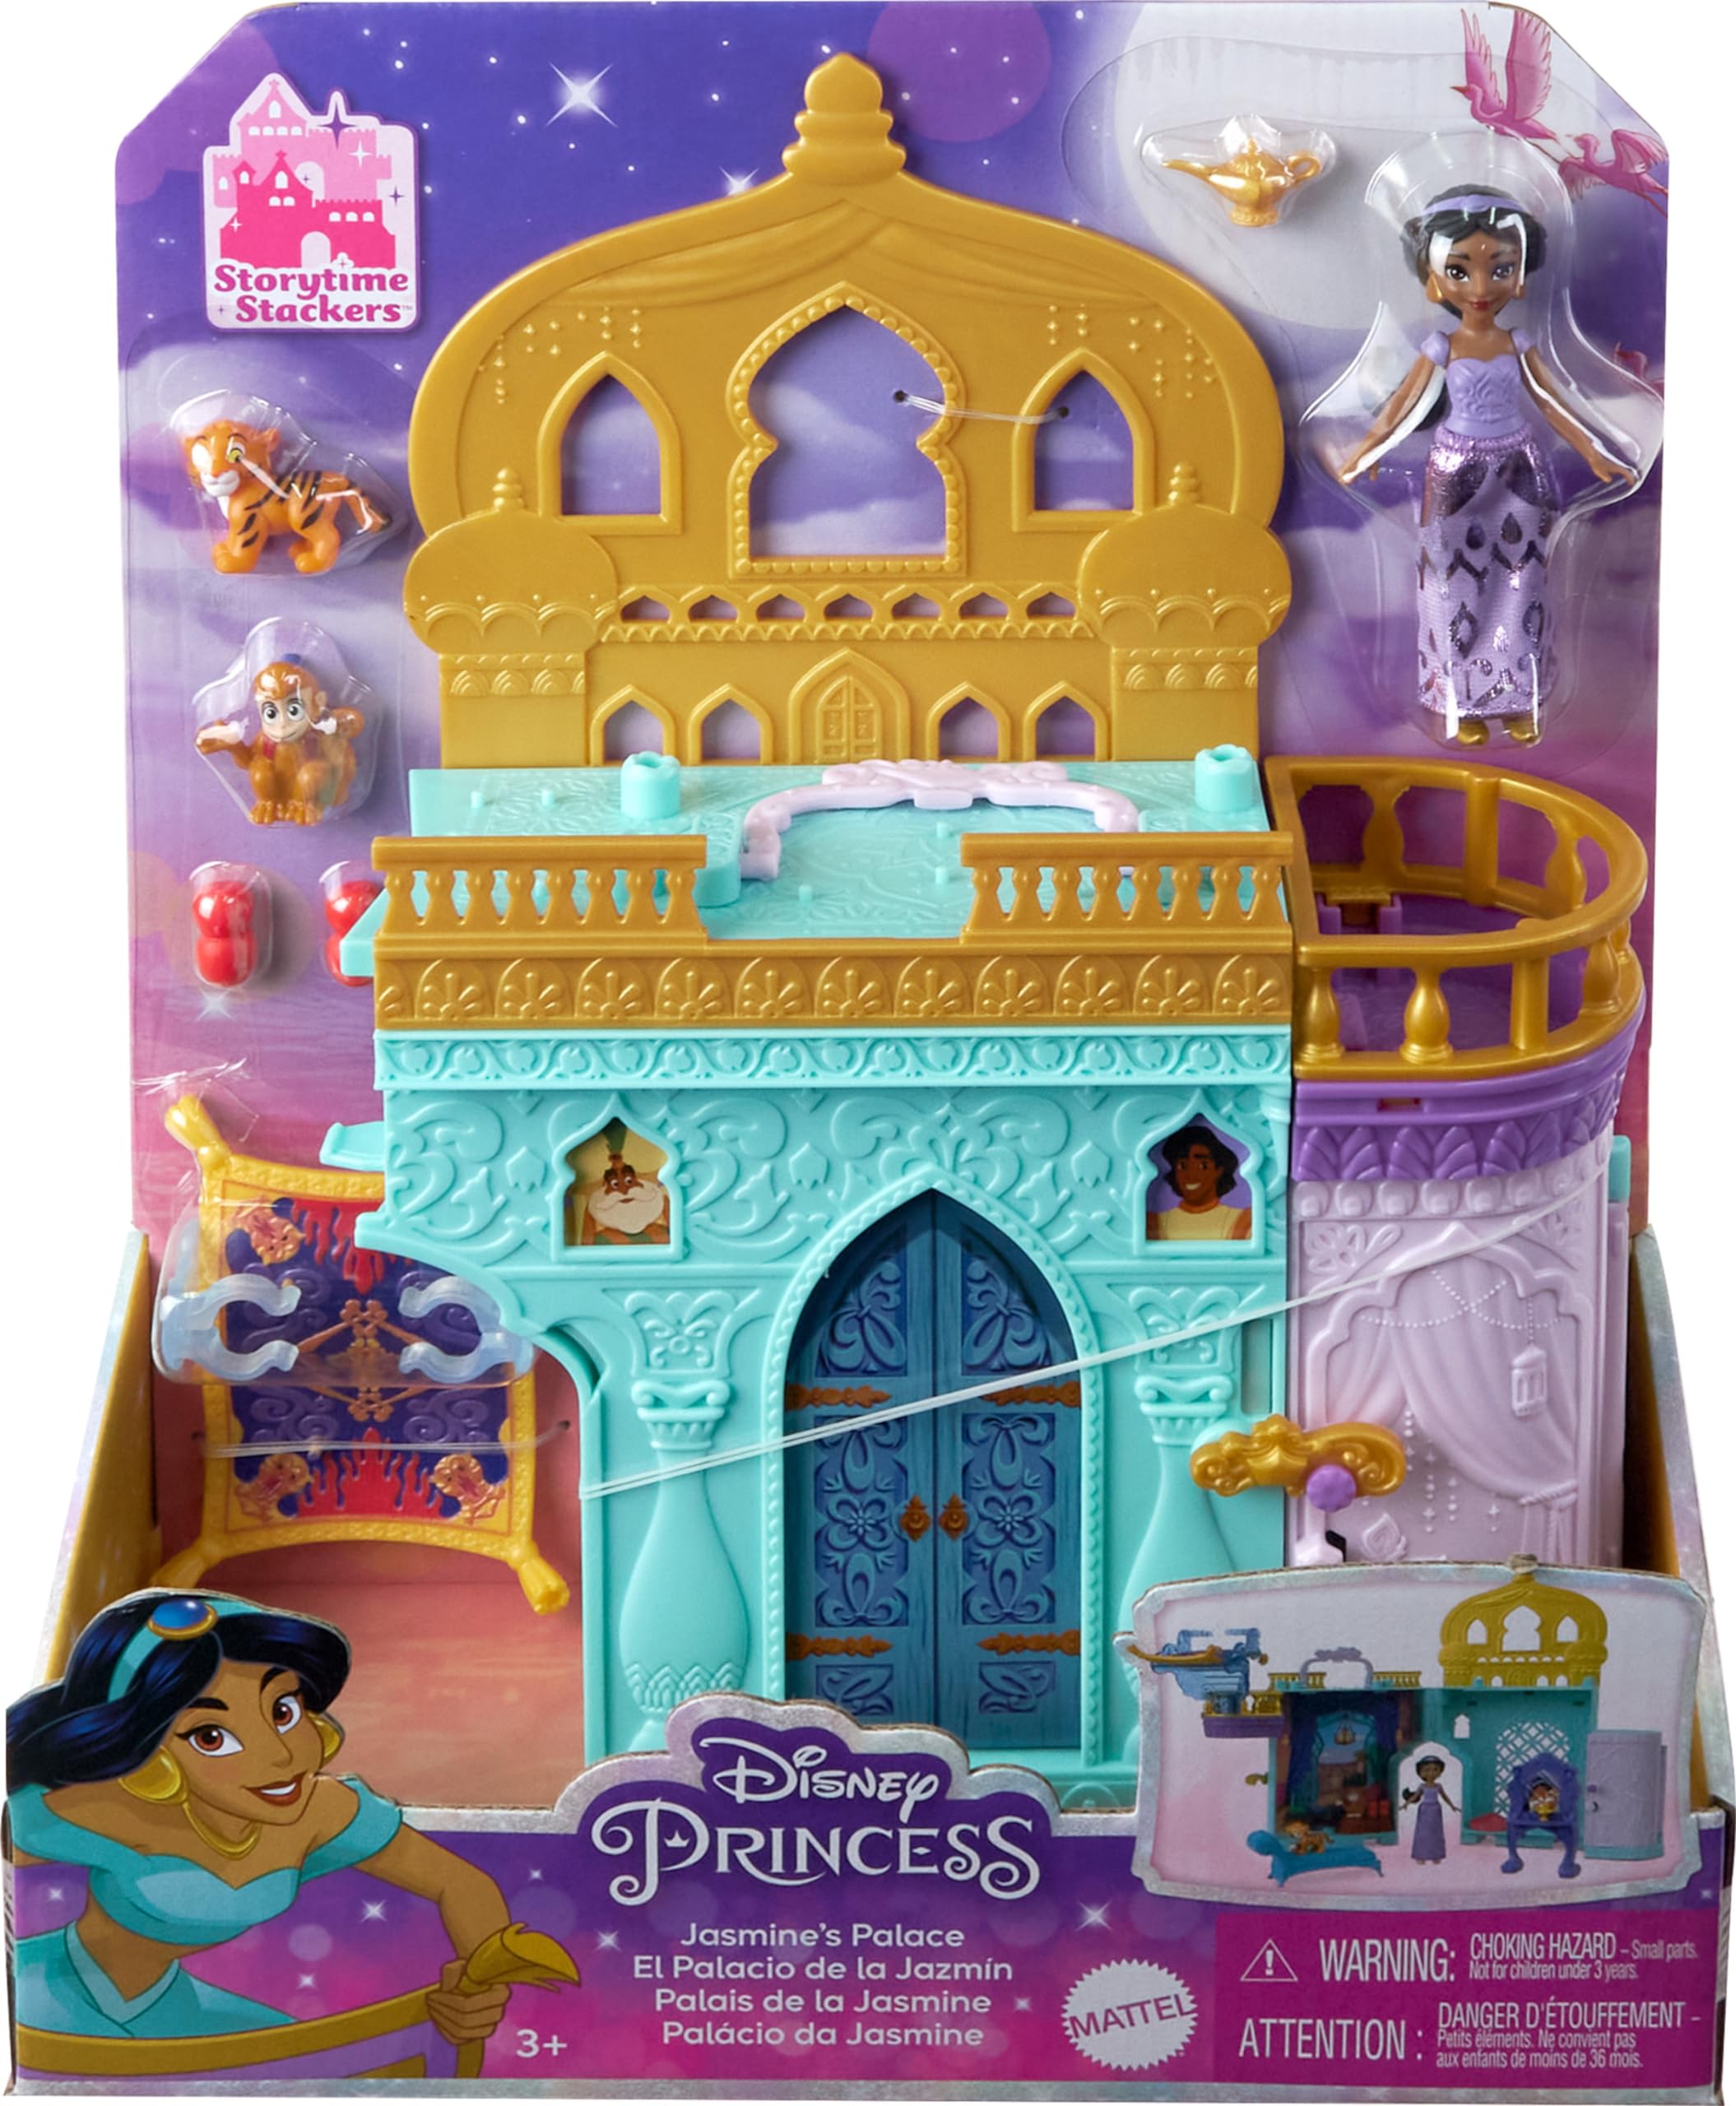 Mattel Disney Princess Jasmine Stackable Castle Doll House Playset with Small Doll, 2 Friends & 7 Pieces, Inspired by Disney Movie Aladdin